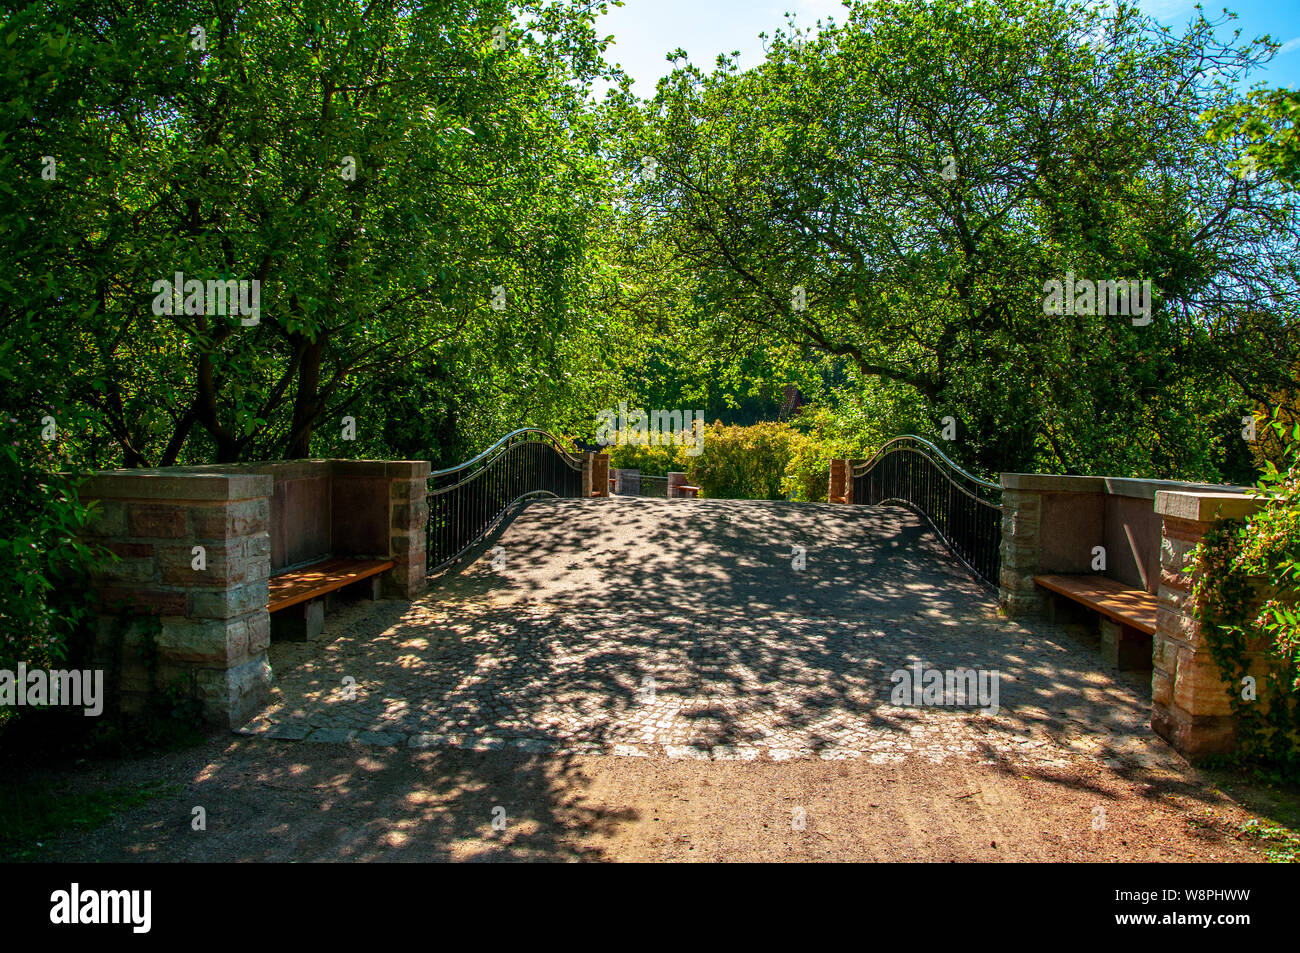 The bridge in the Pildammsparken park in the city of Malmo, Sweden Stock Photo